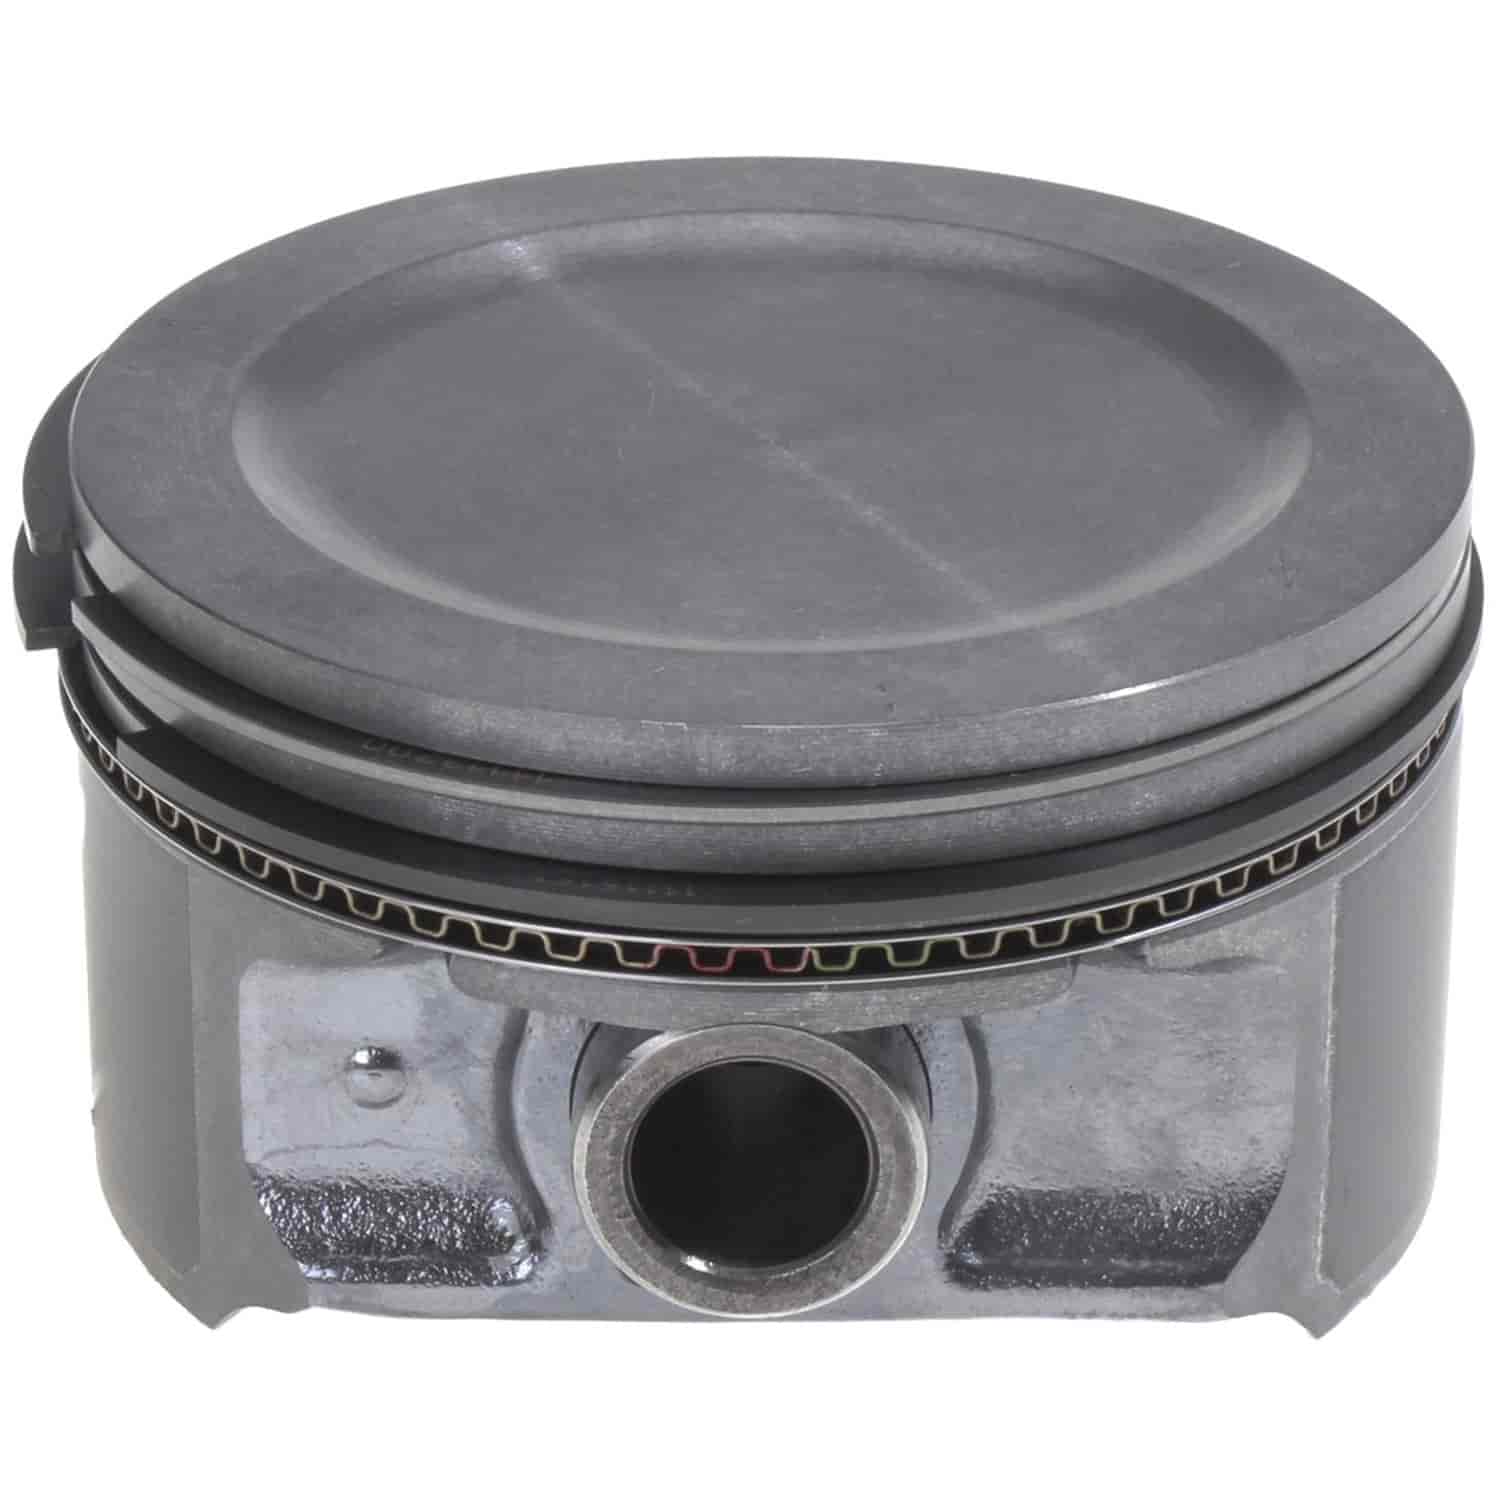 Piston With Rings for 1997-1999 Ford 5.4L SOHC V8 Engine [Std. Bore]